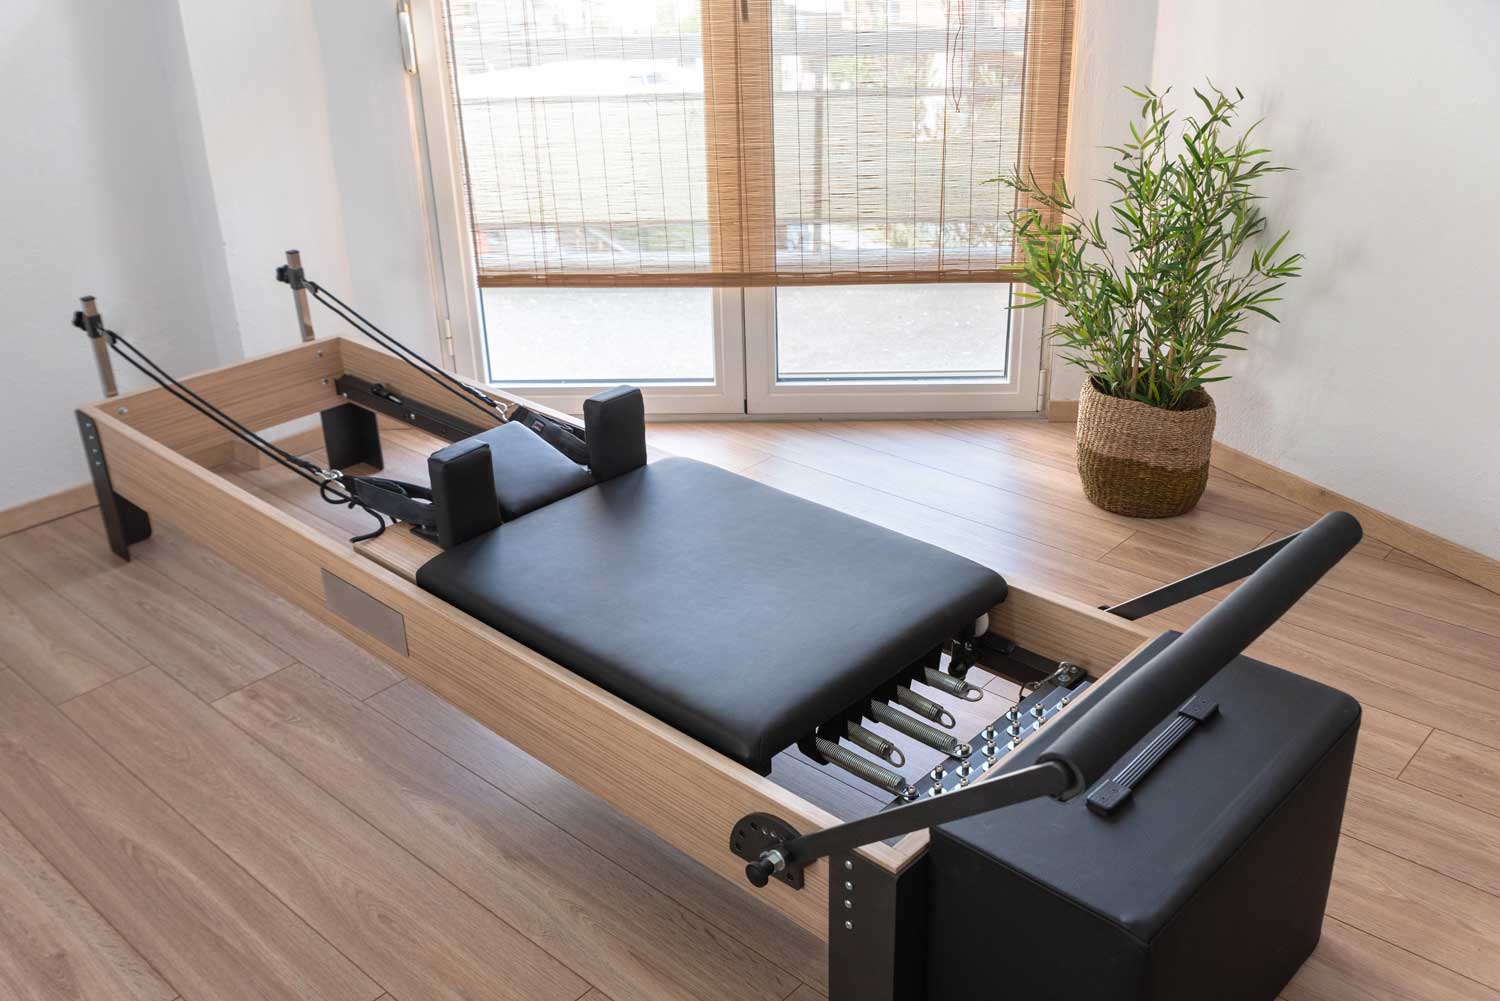 Pilates Reformer apparatus used in the exercises invented by Joseph Pilates | Spine & Sport PT | Rancho Santa Margarita, CA Clinic